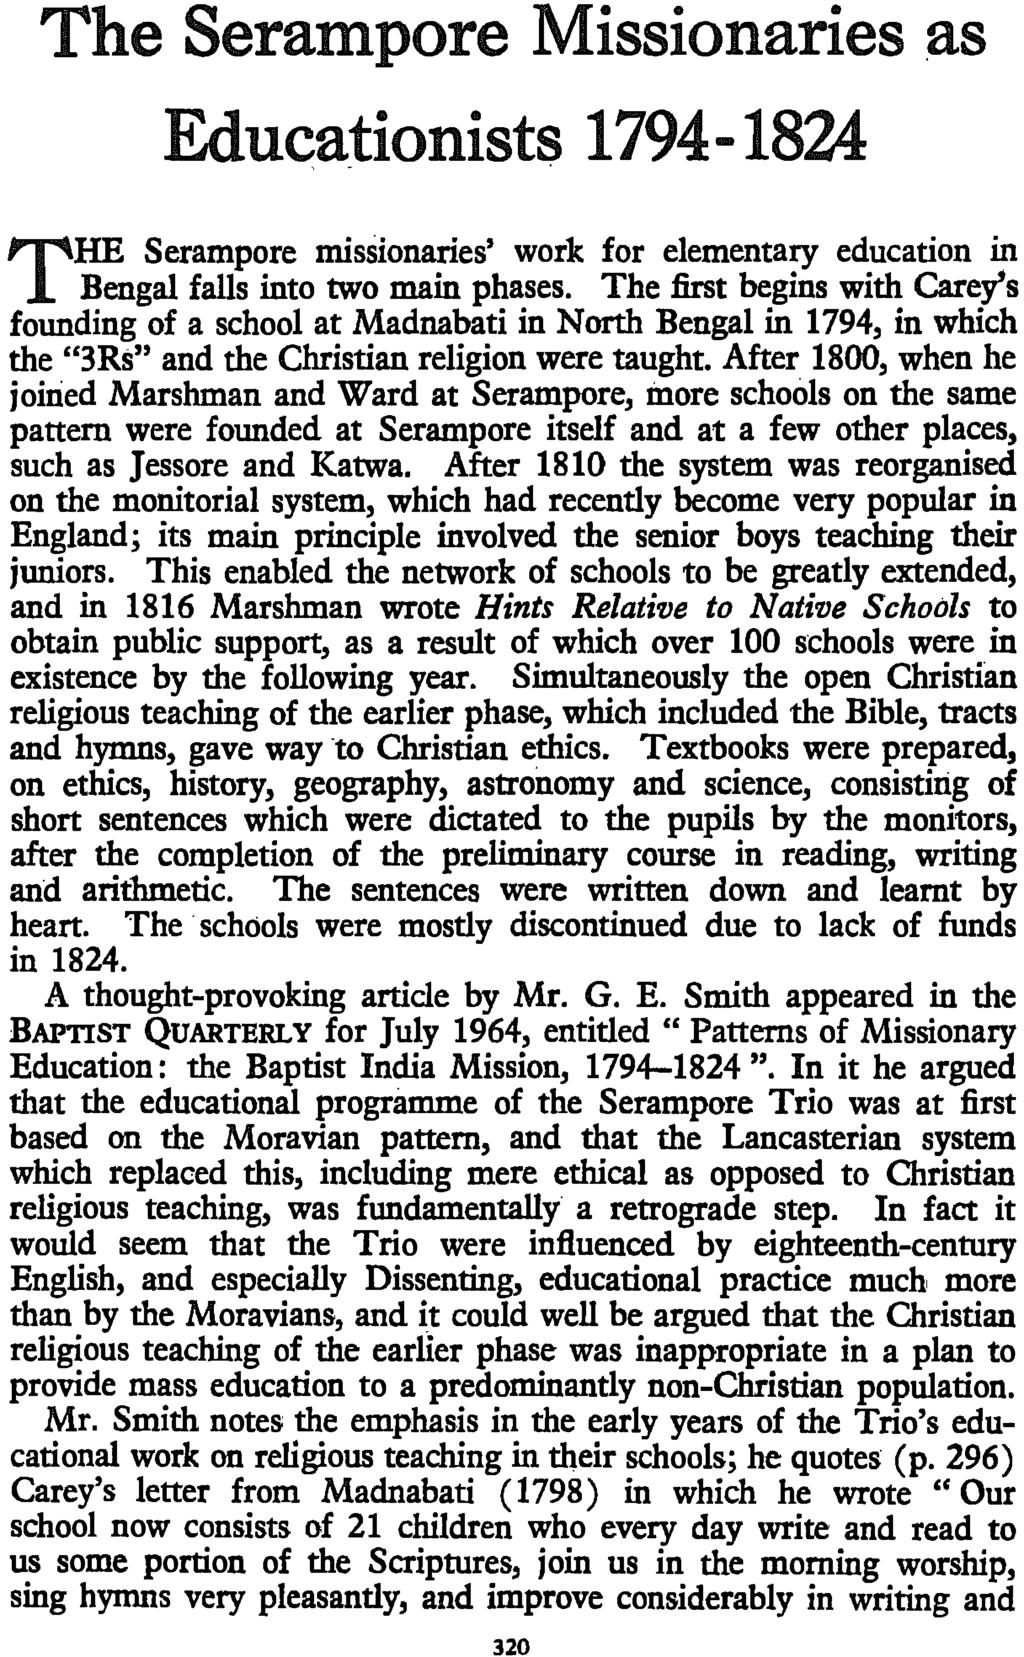 The Serampore Missionaries as Educationists 1794... 1824 THE Serampore missionaries' work for elementary education in Bengal falls into two main phases.